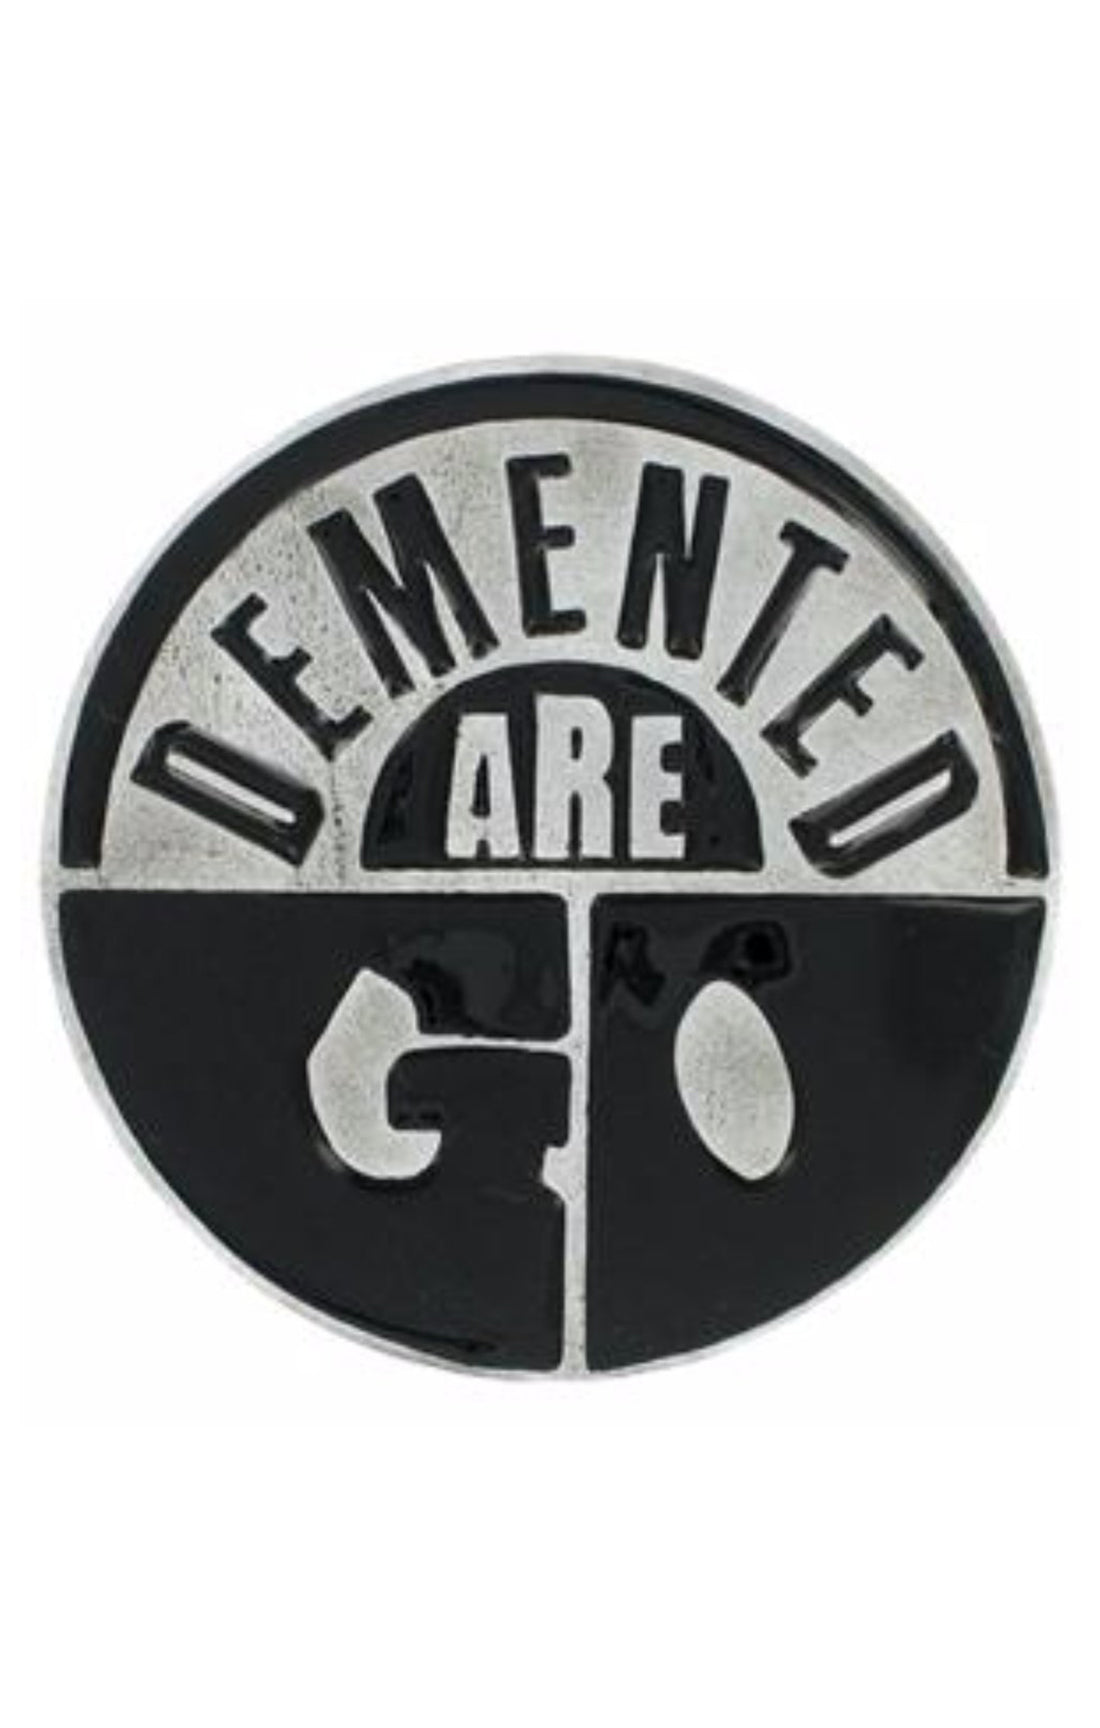 The “DEMENTED ARE GO” belt buckle